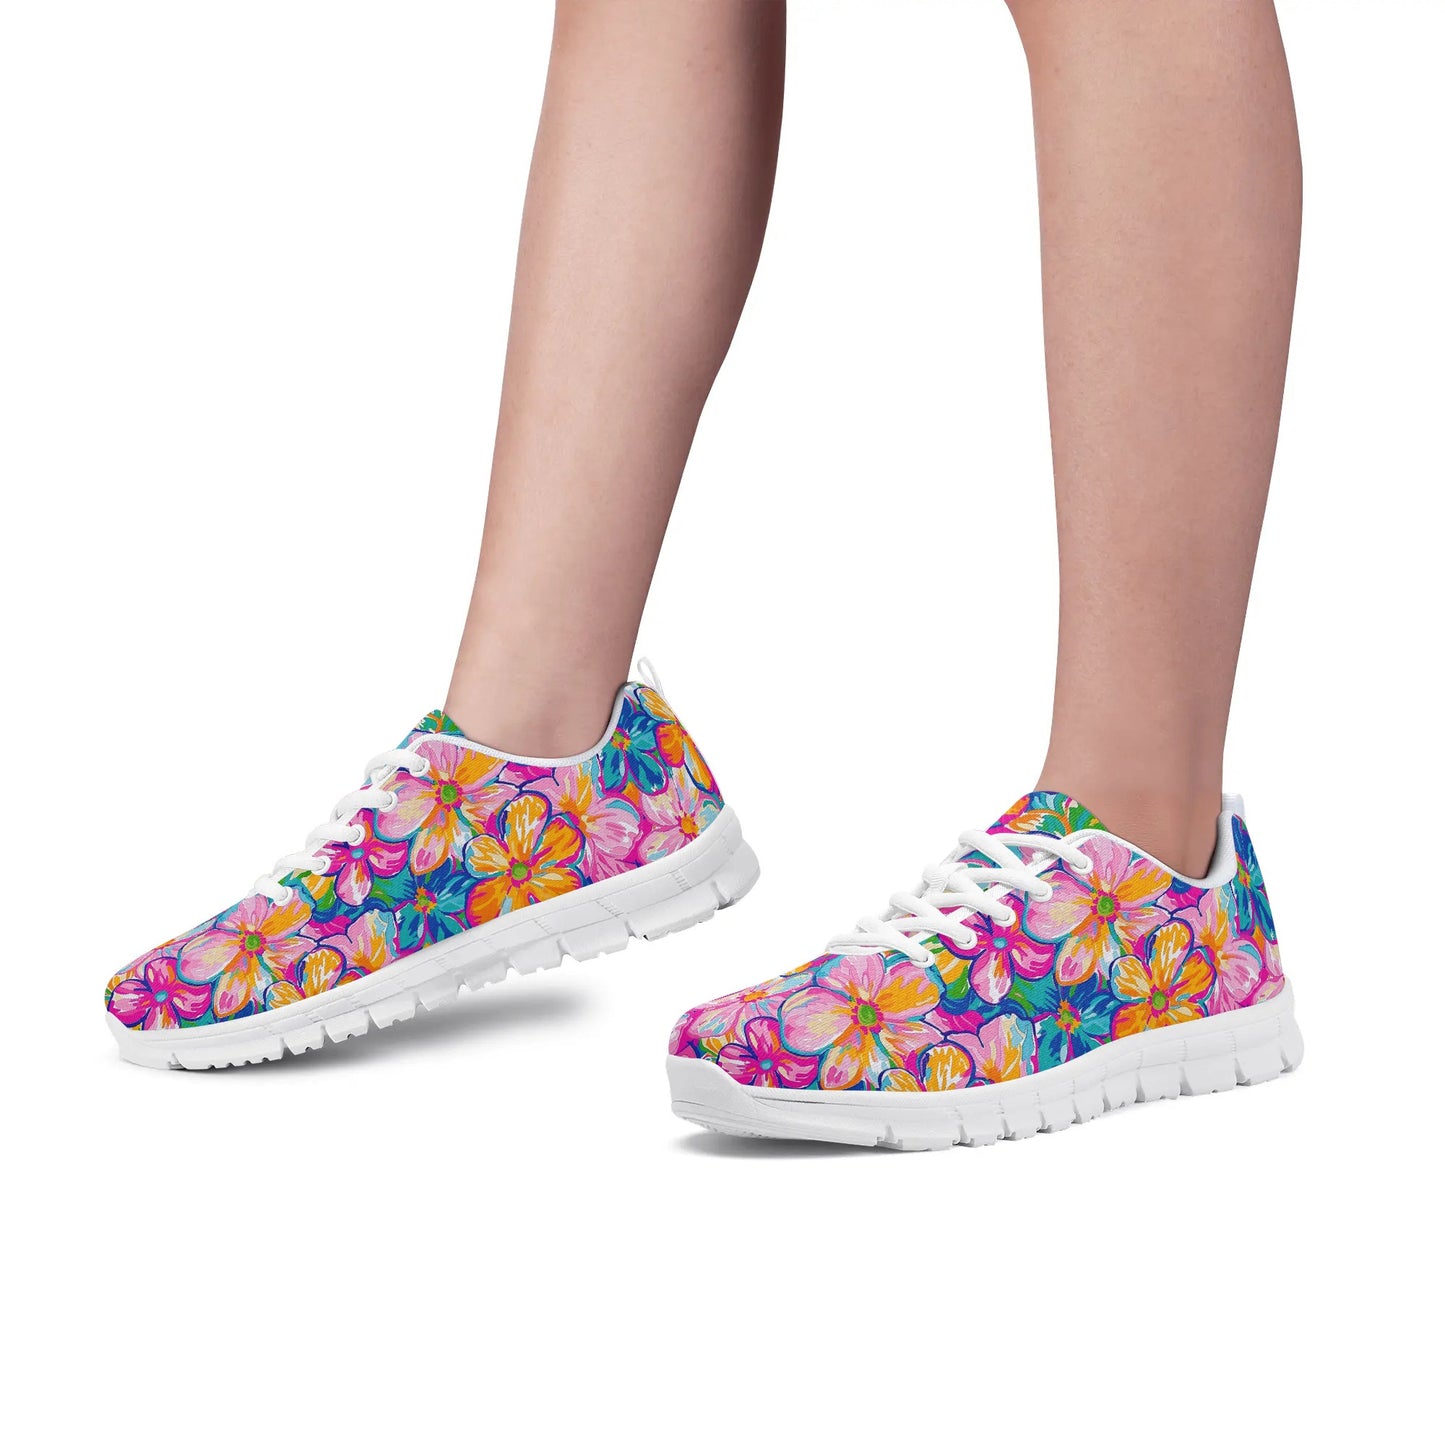 Chromatic Blossoms: Large Watercolor Flowers in Mixed Pinks, Blues, and Oranges Womens EVA Mesh Running Shoes US5-US12